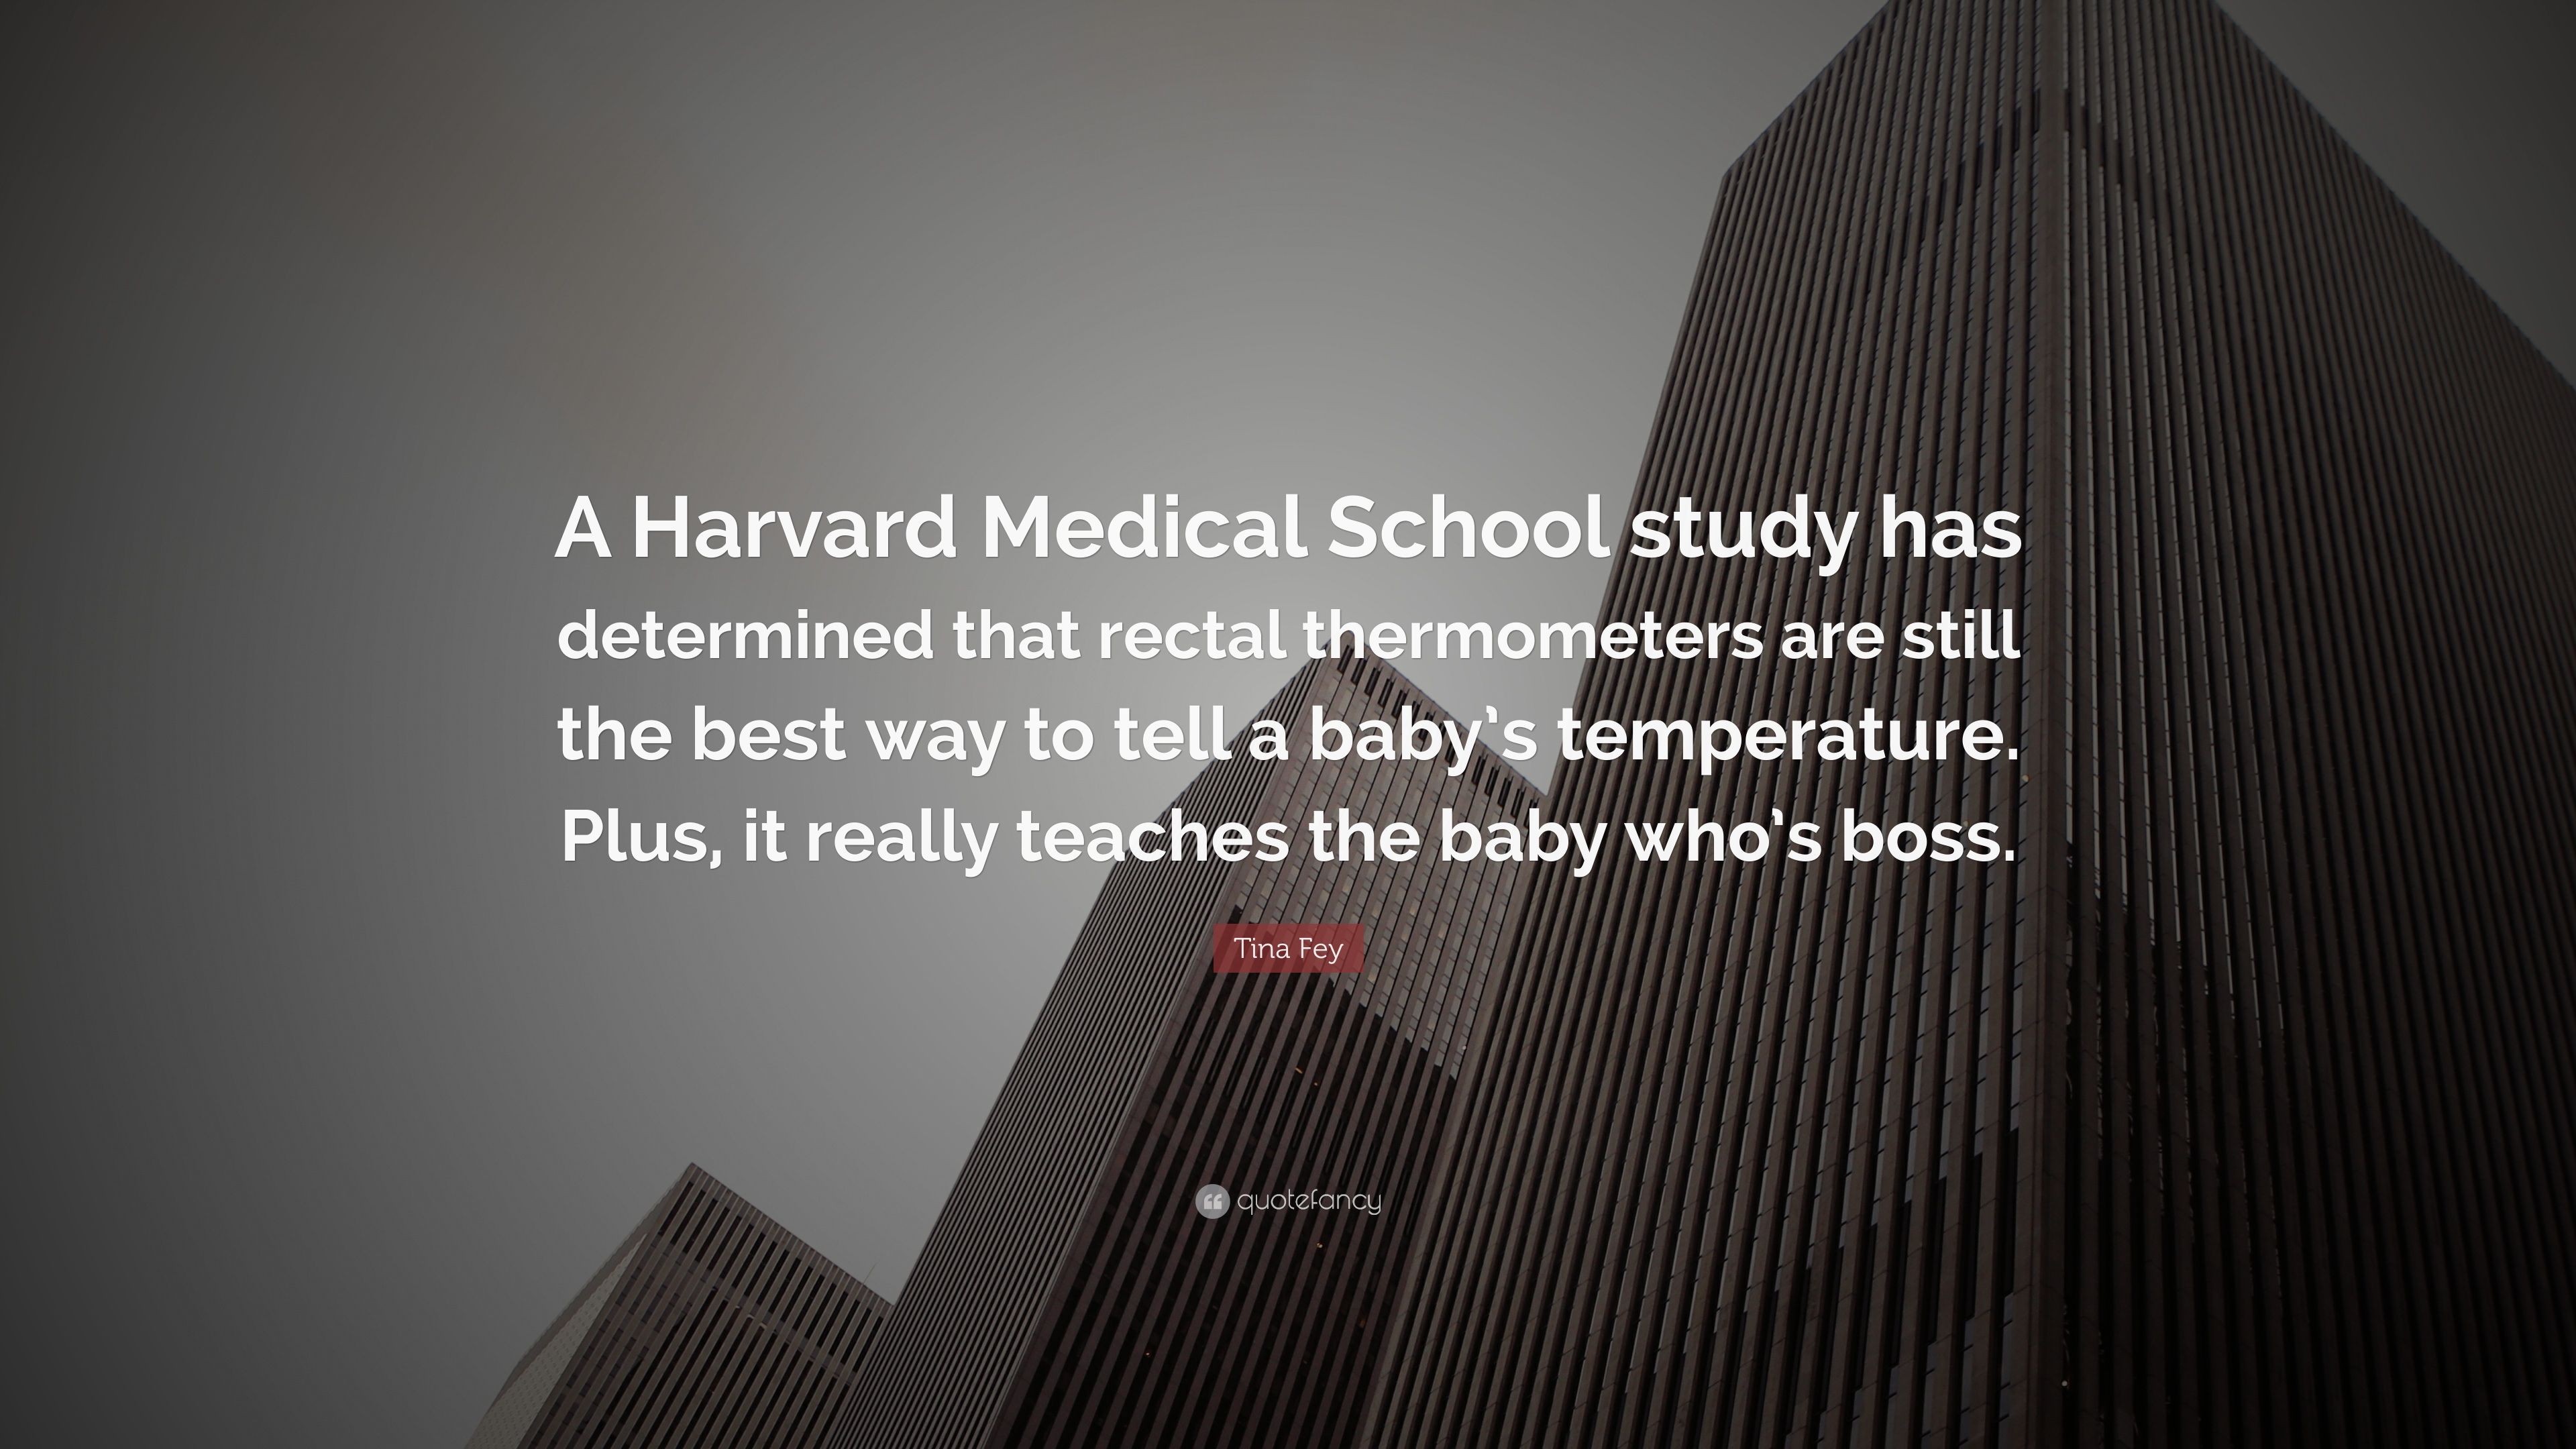 Tina Fey Quote: “A Harvard Medical School study has determined that rectal thermometers are still the best way to tell a baby's temperatu.”